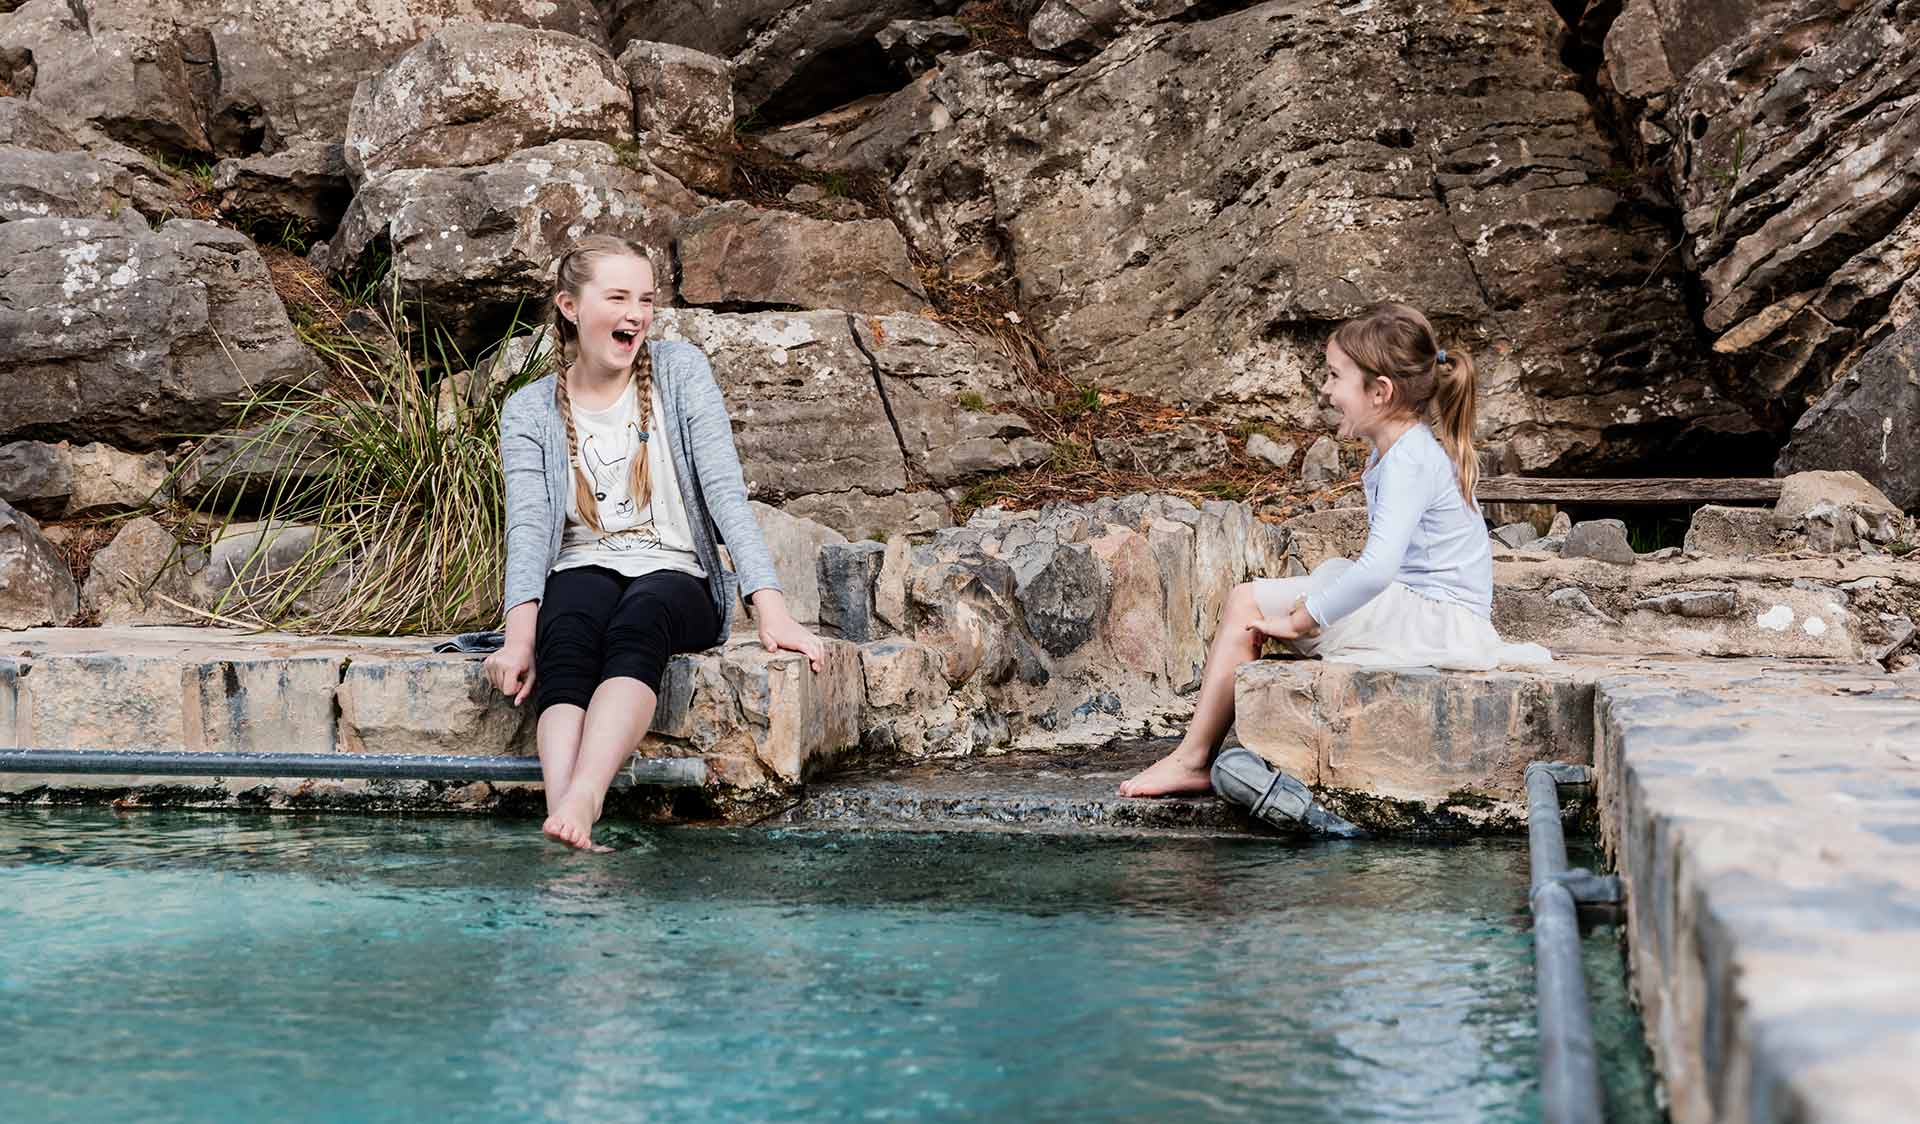 Two young girls sit on the edge of the natural spring swimming pool at Buchan Caves and dangle their feet into the water.